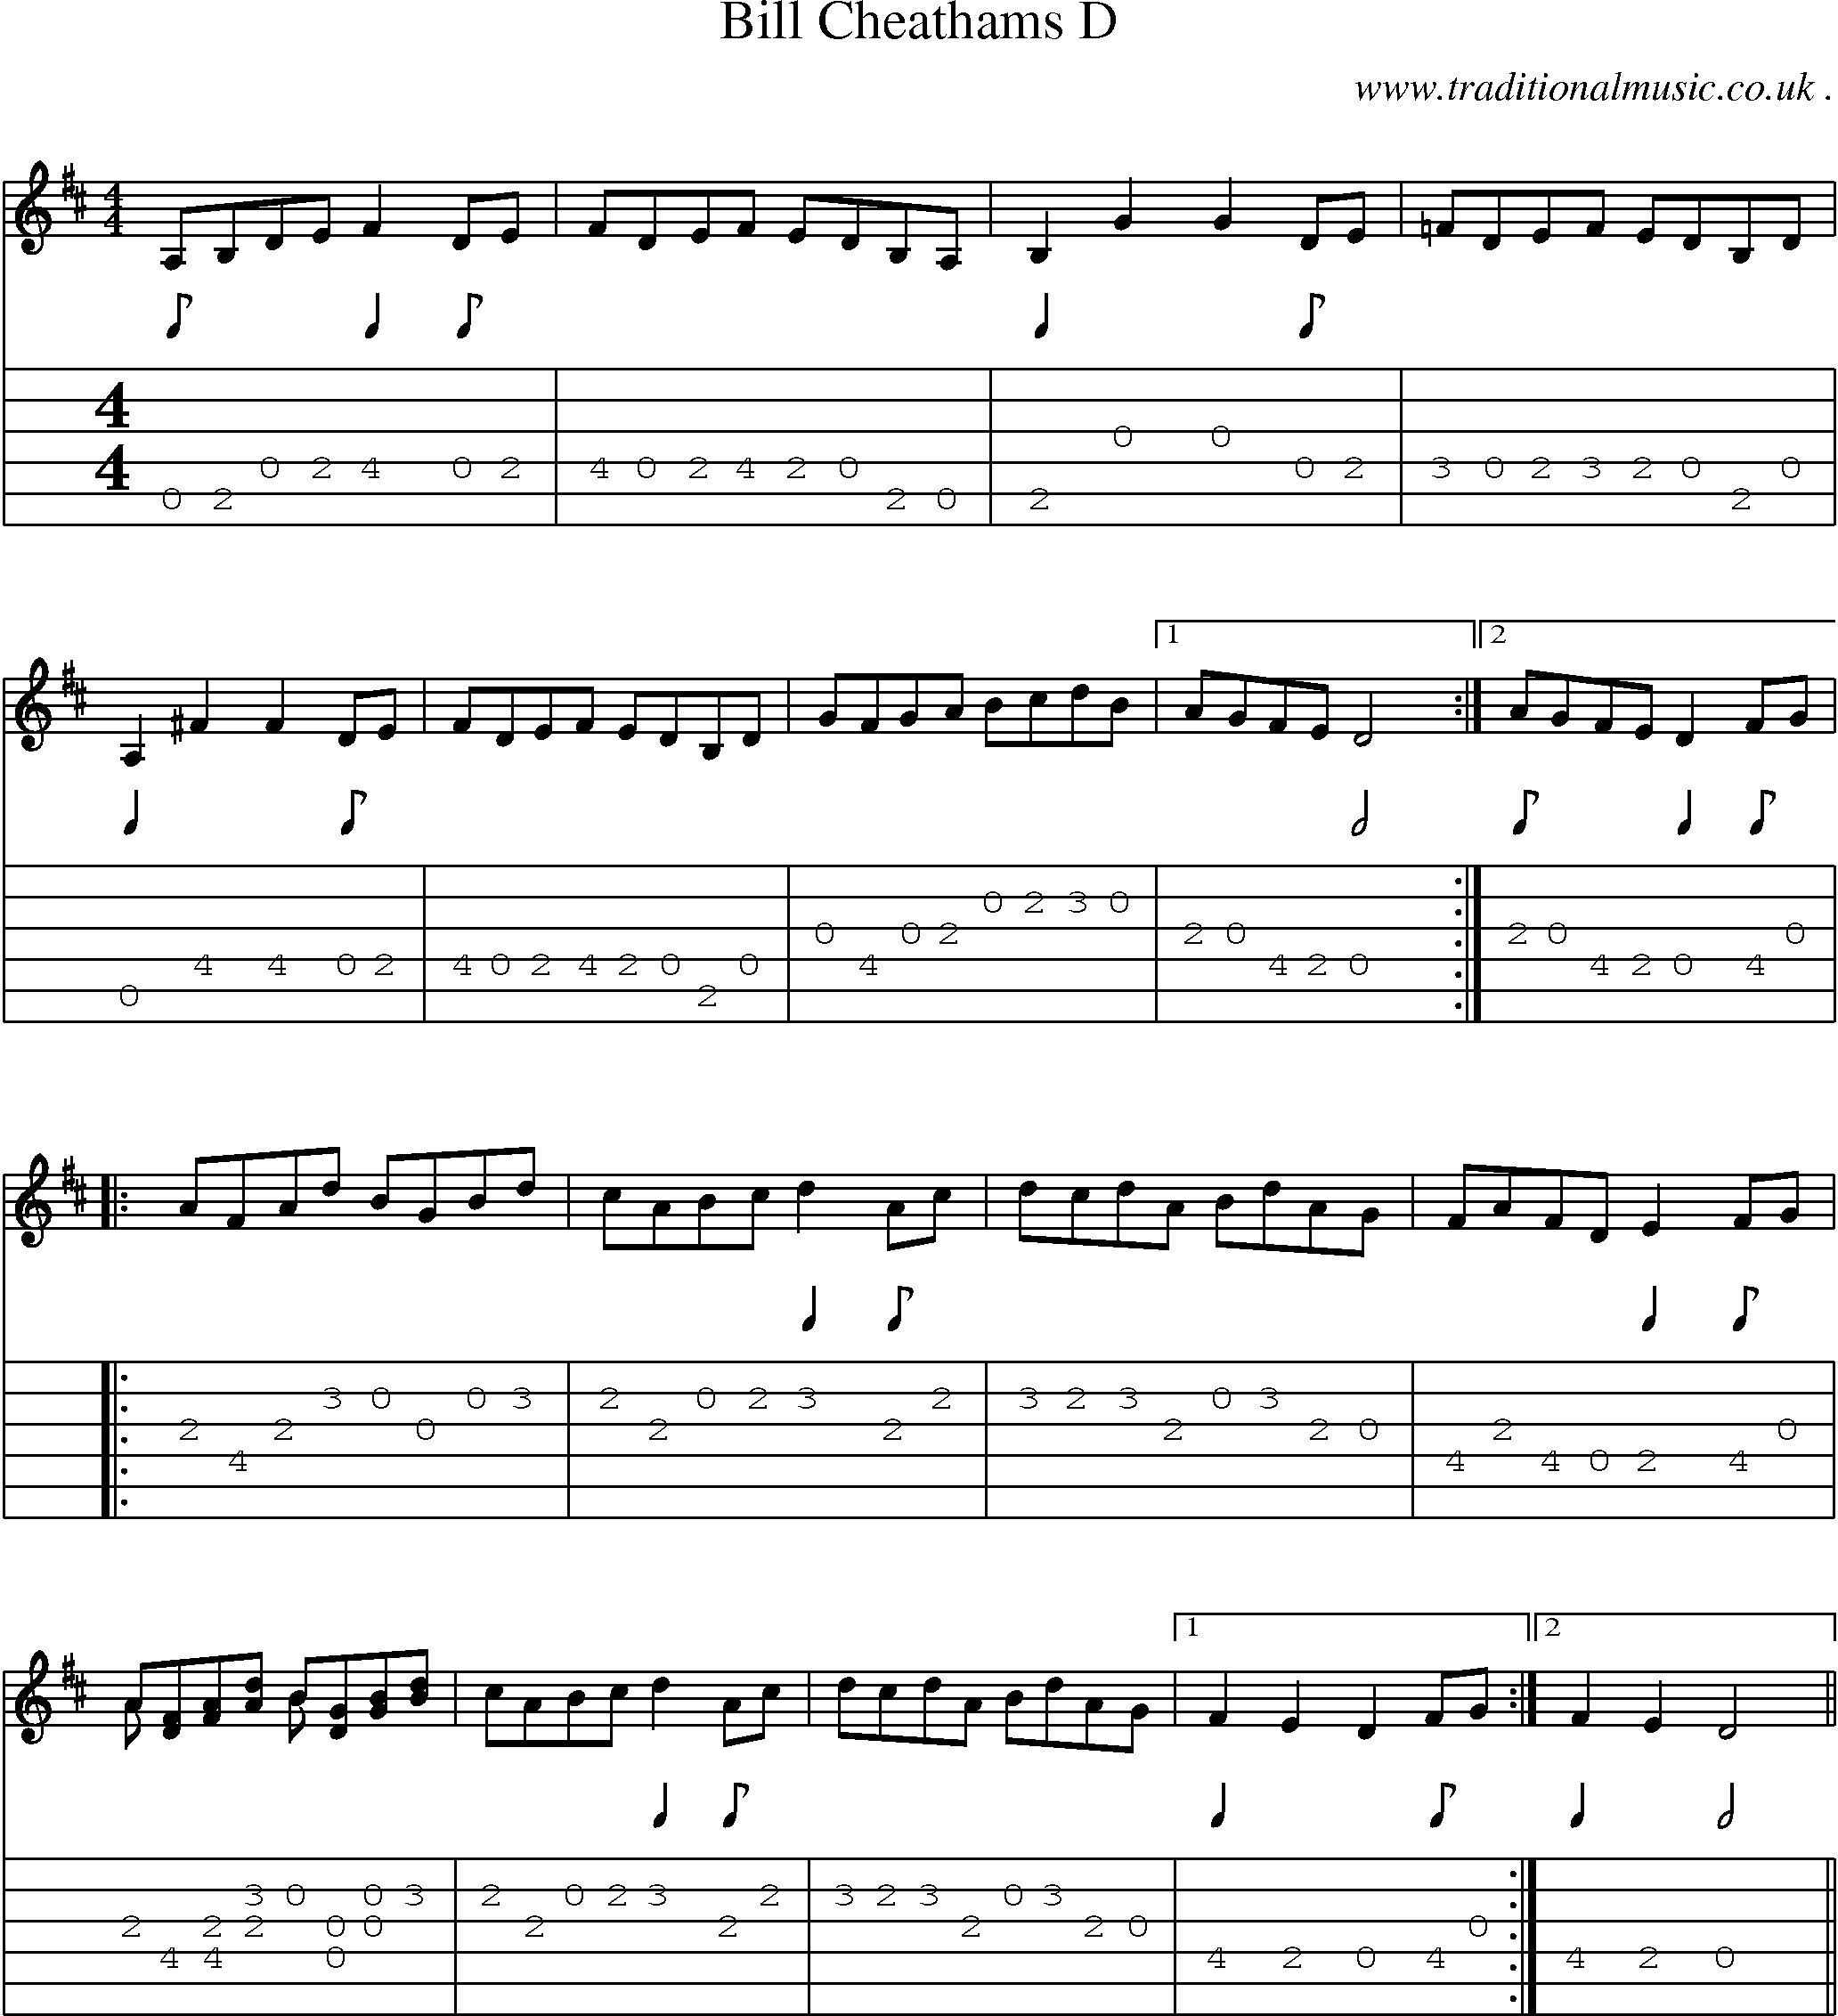 Music Score and Guitar Tabs for Bill Cheathams D